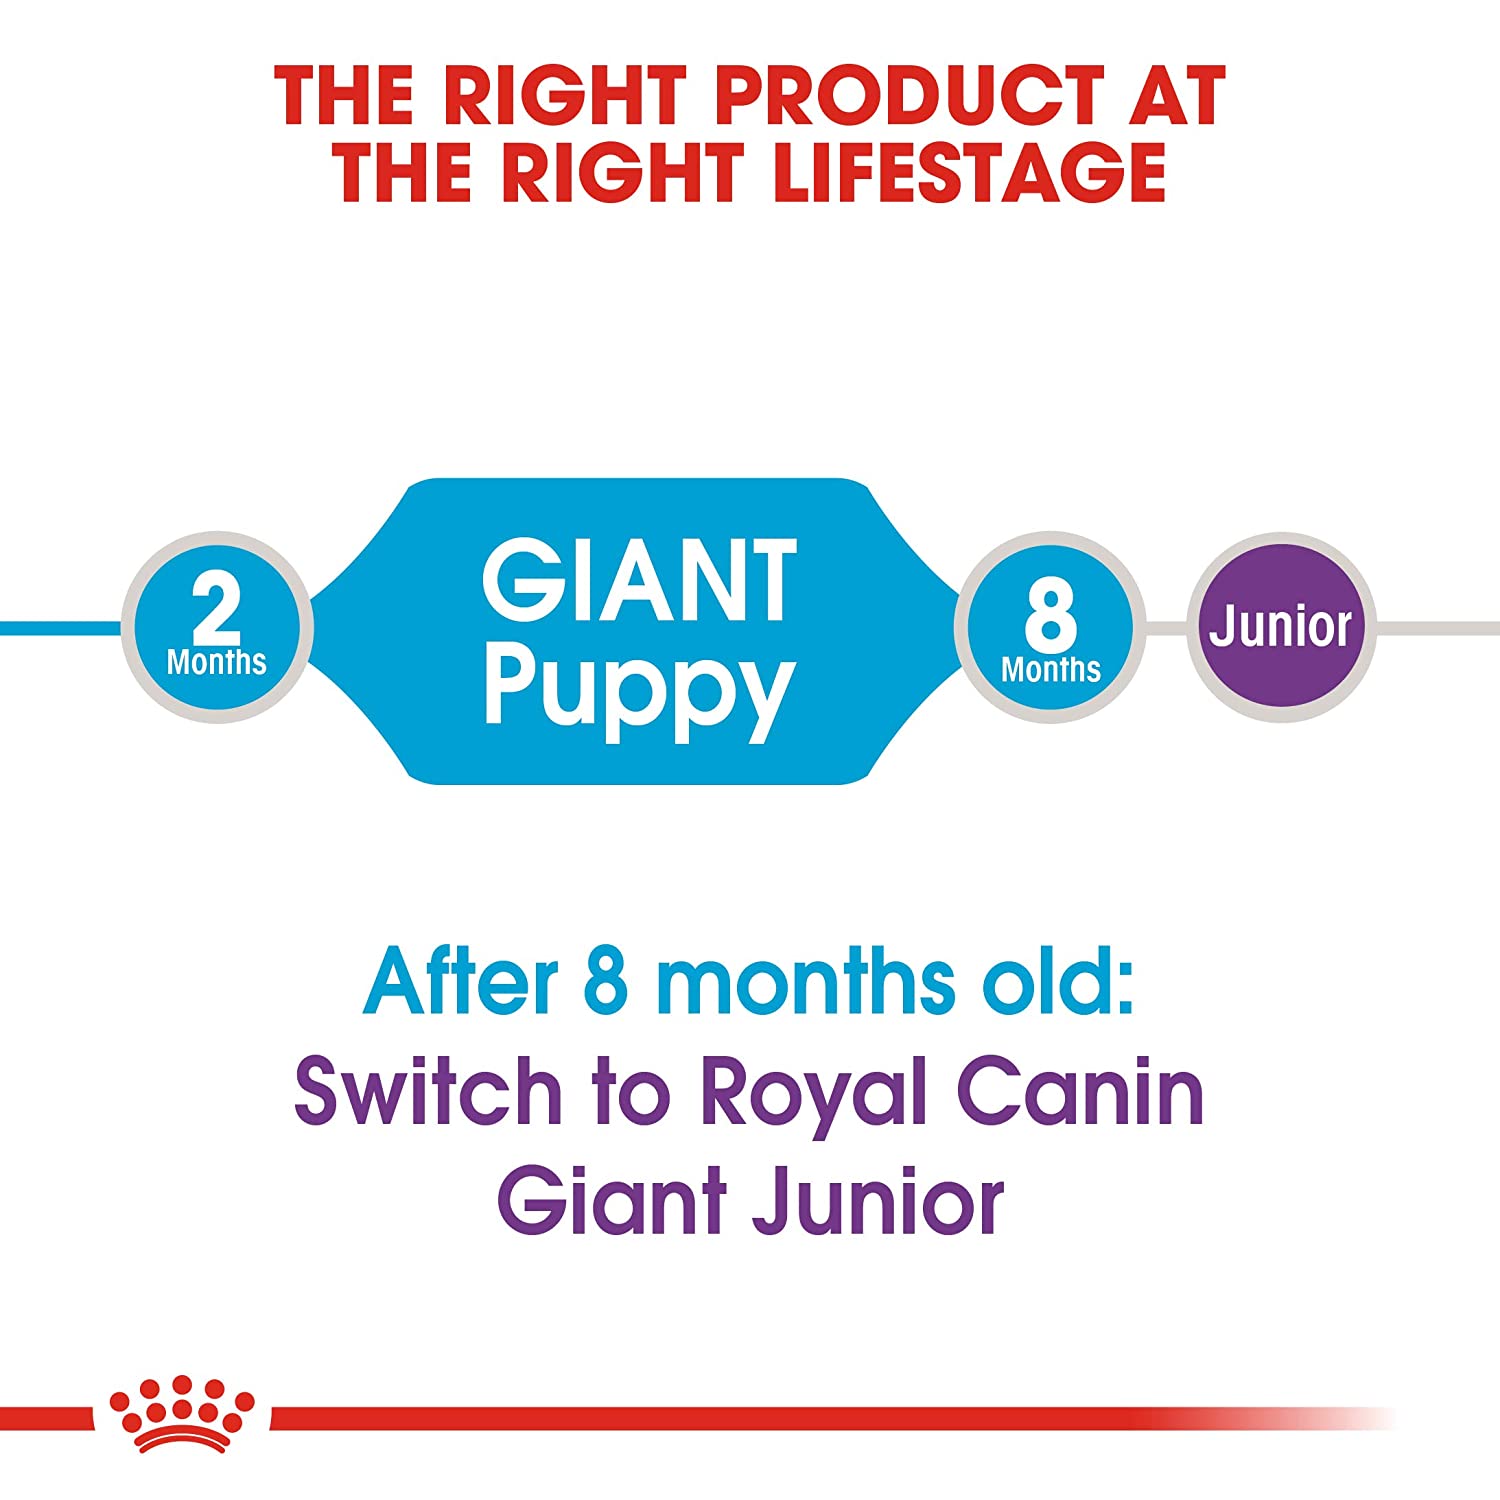 Royal Canin Giant Puppy Food